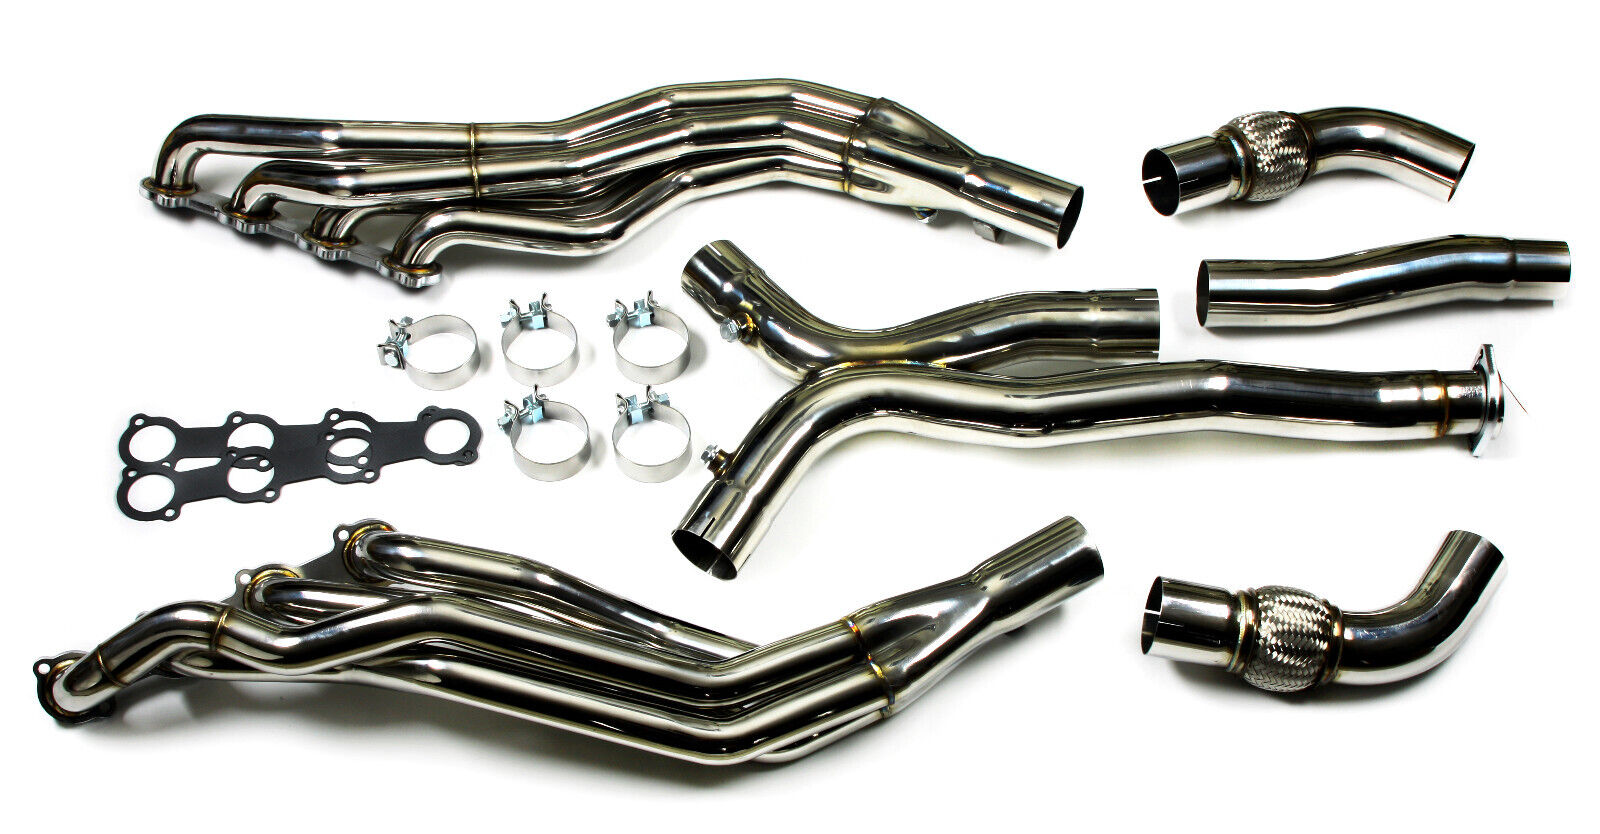 FOR AMG CLS55 CLS500 E55 E500 MERCEDES BENZ M113K LONG HEADERS REPLACEMENT